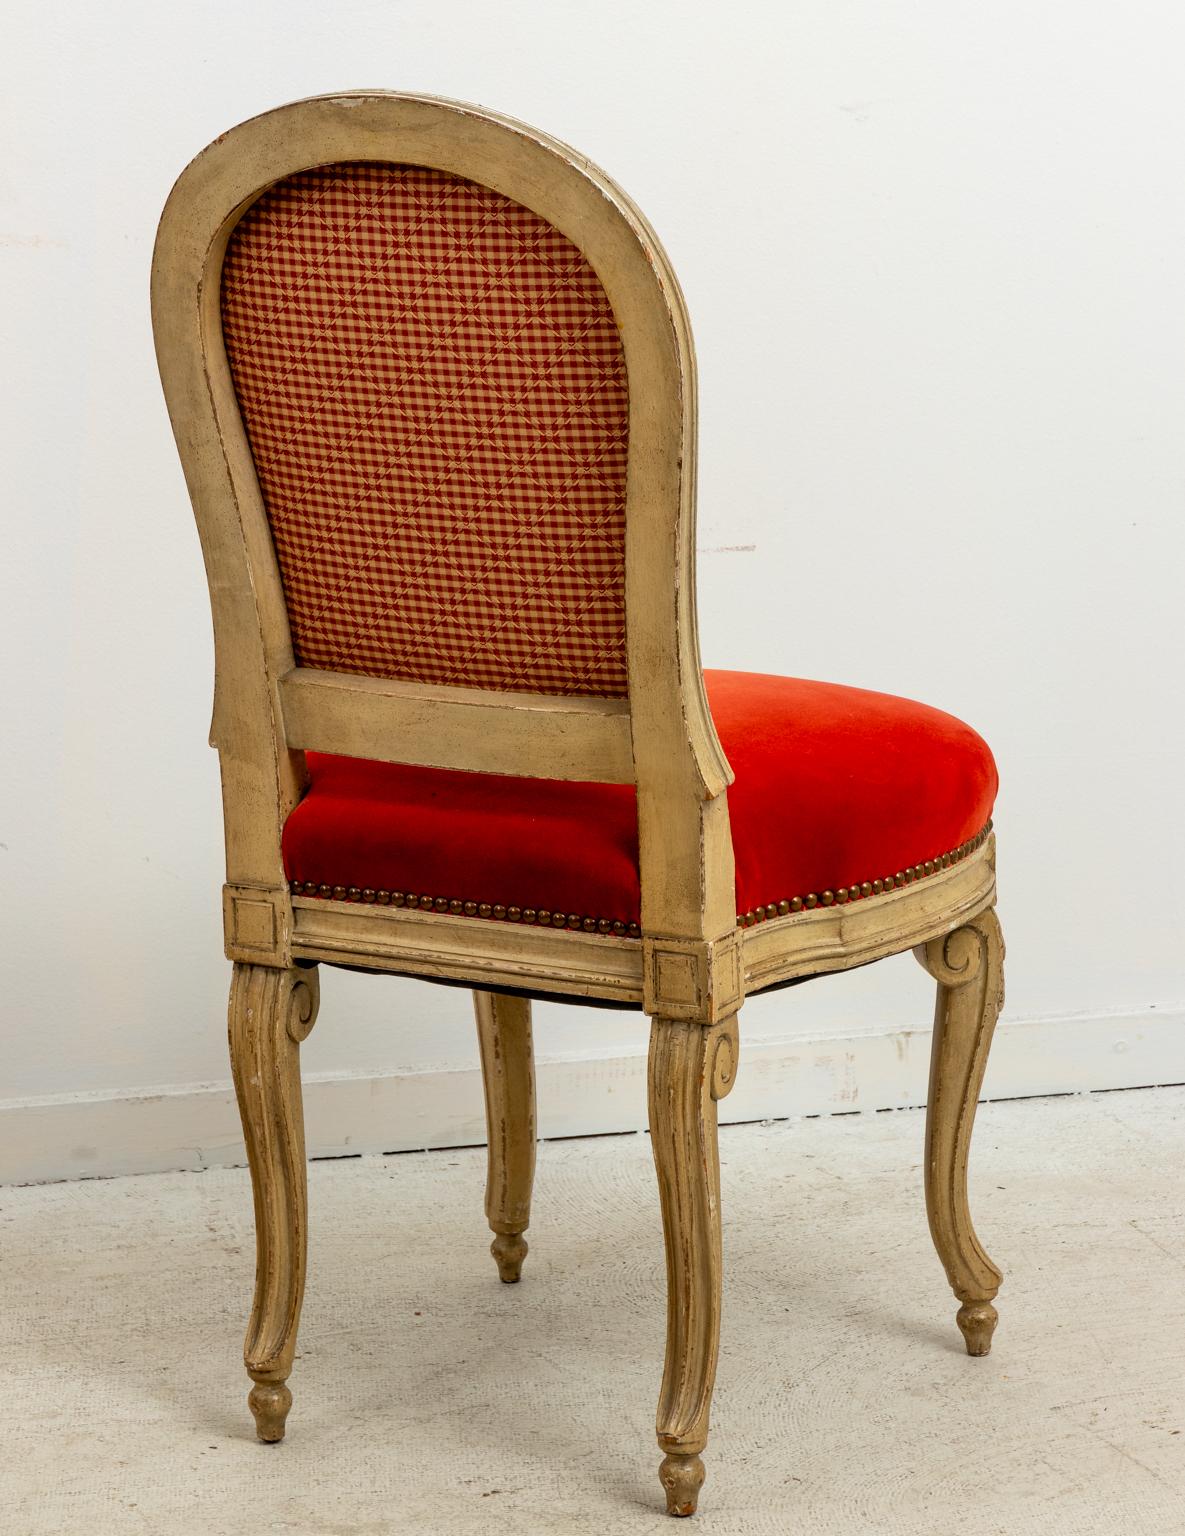 Set of fourteen French dining chairs upholstered in orange velvet with distressed finish, circa 1920s. The chairs also feature metal nail head trim and scrolled legs. Please note of wear consistent with age including finish loss and paint loss. One